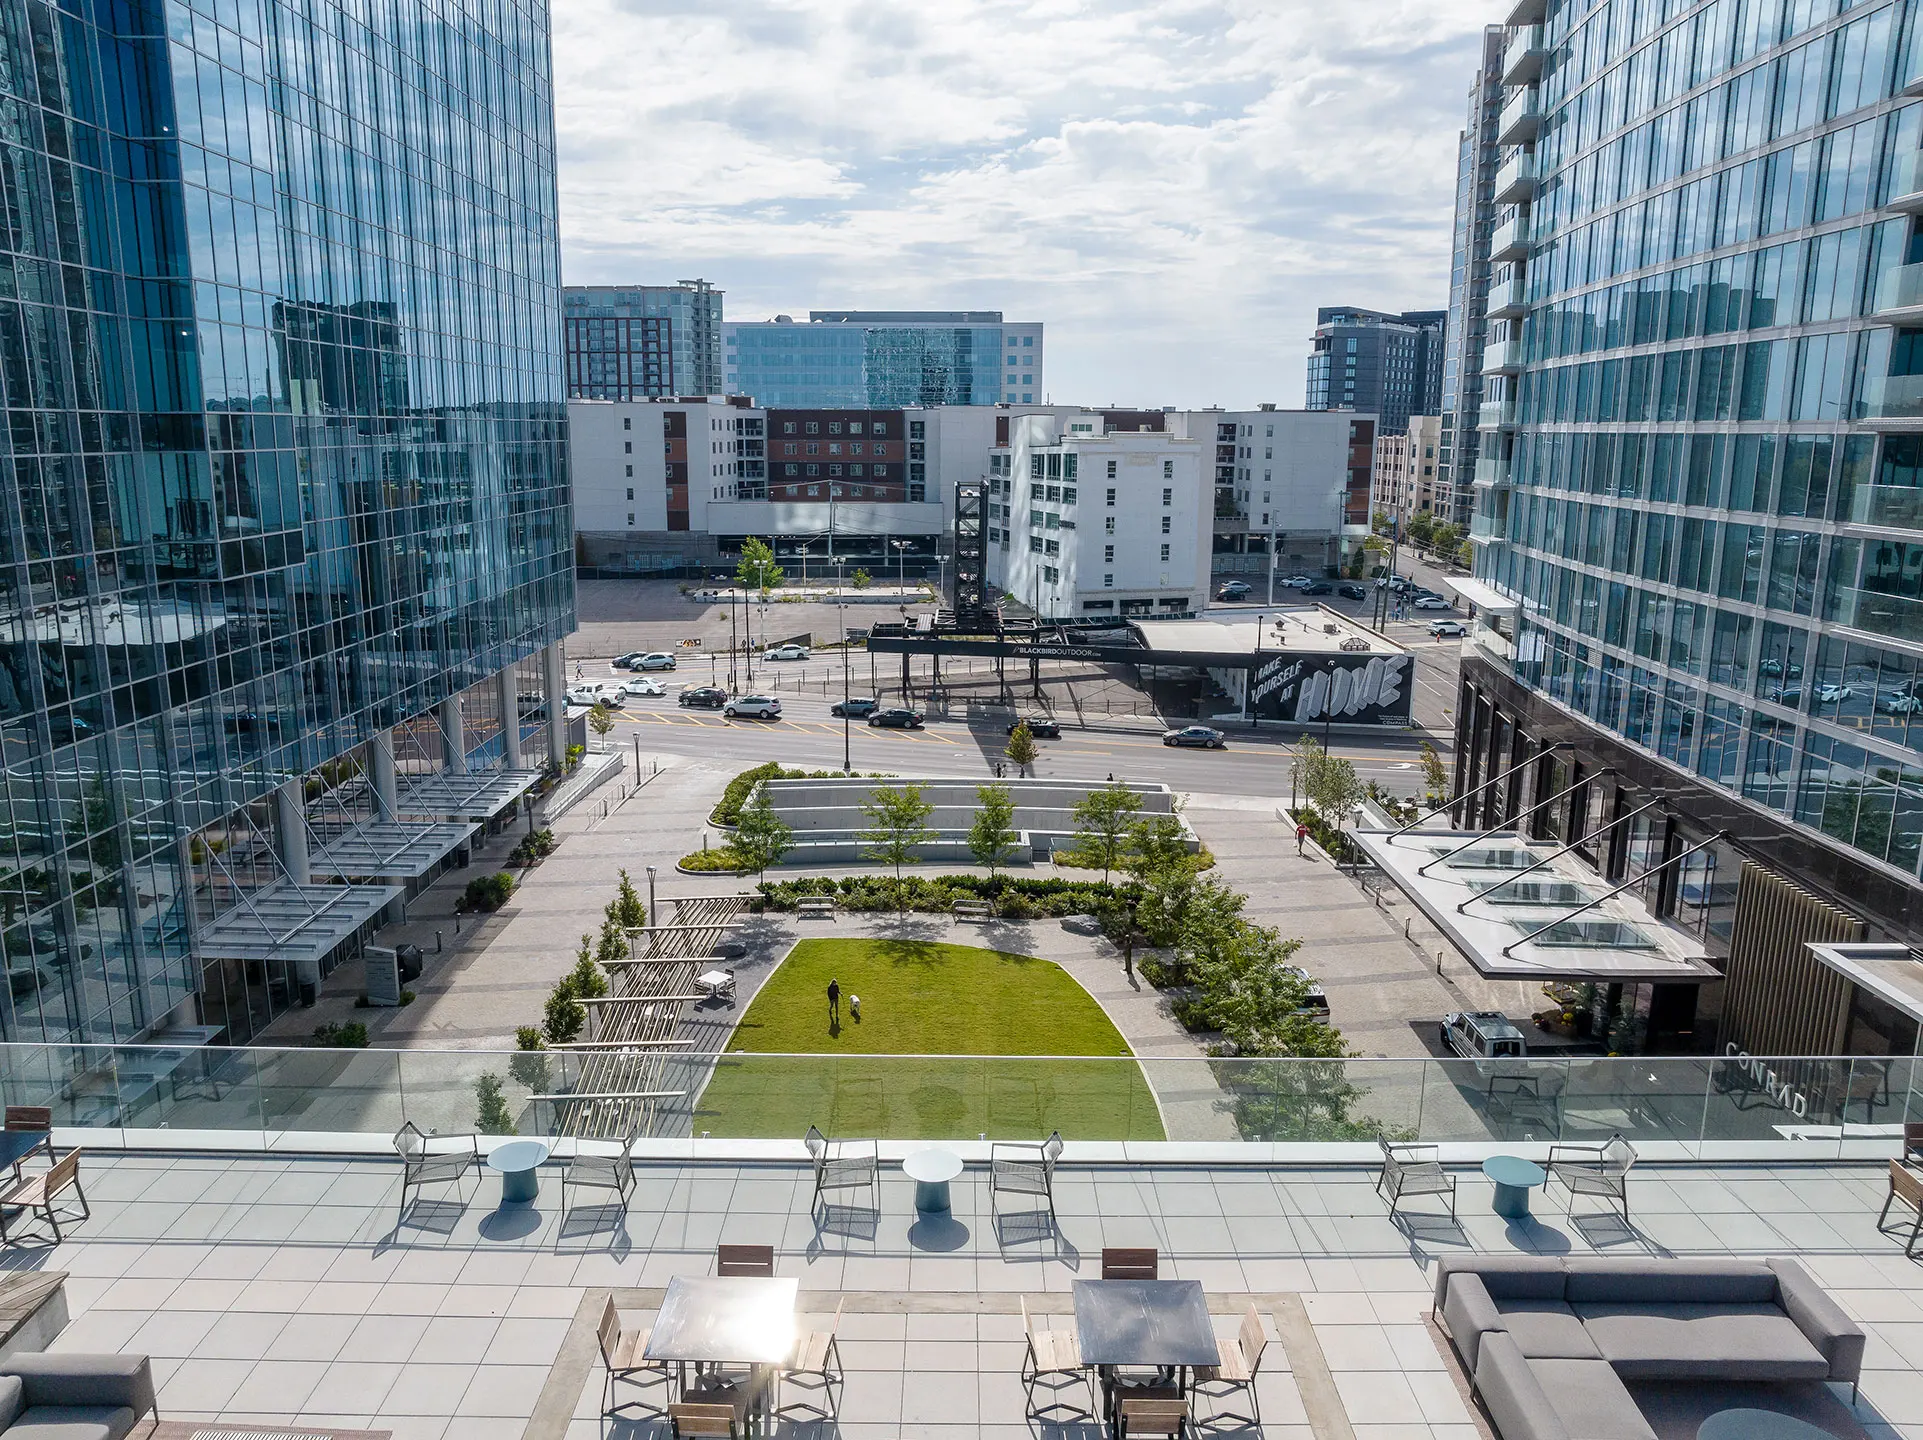 Broadwest Mixed-Use Project in Nashville, View of Plaza